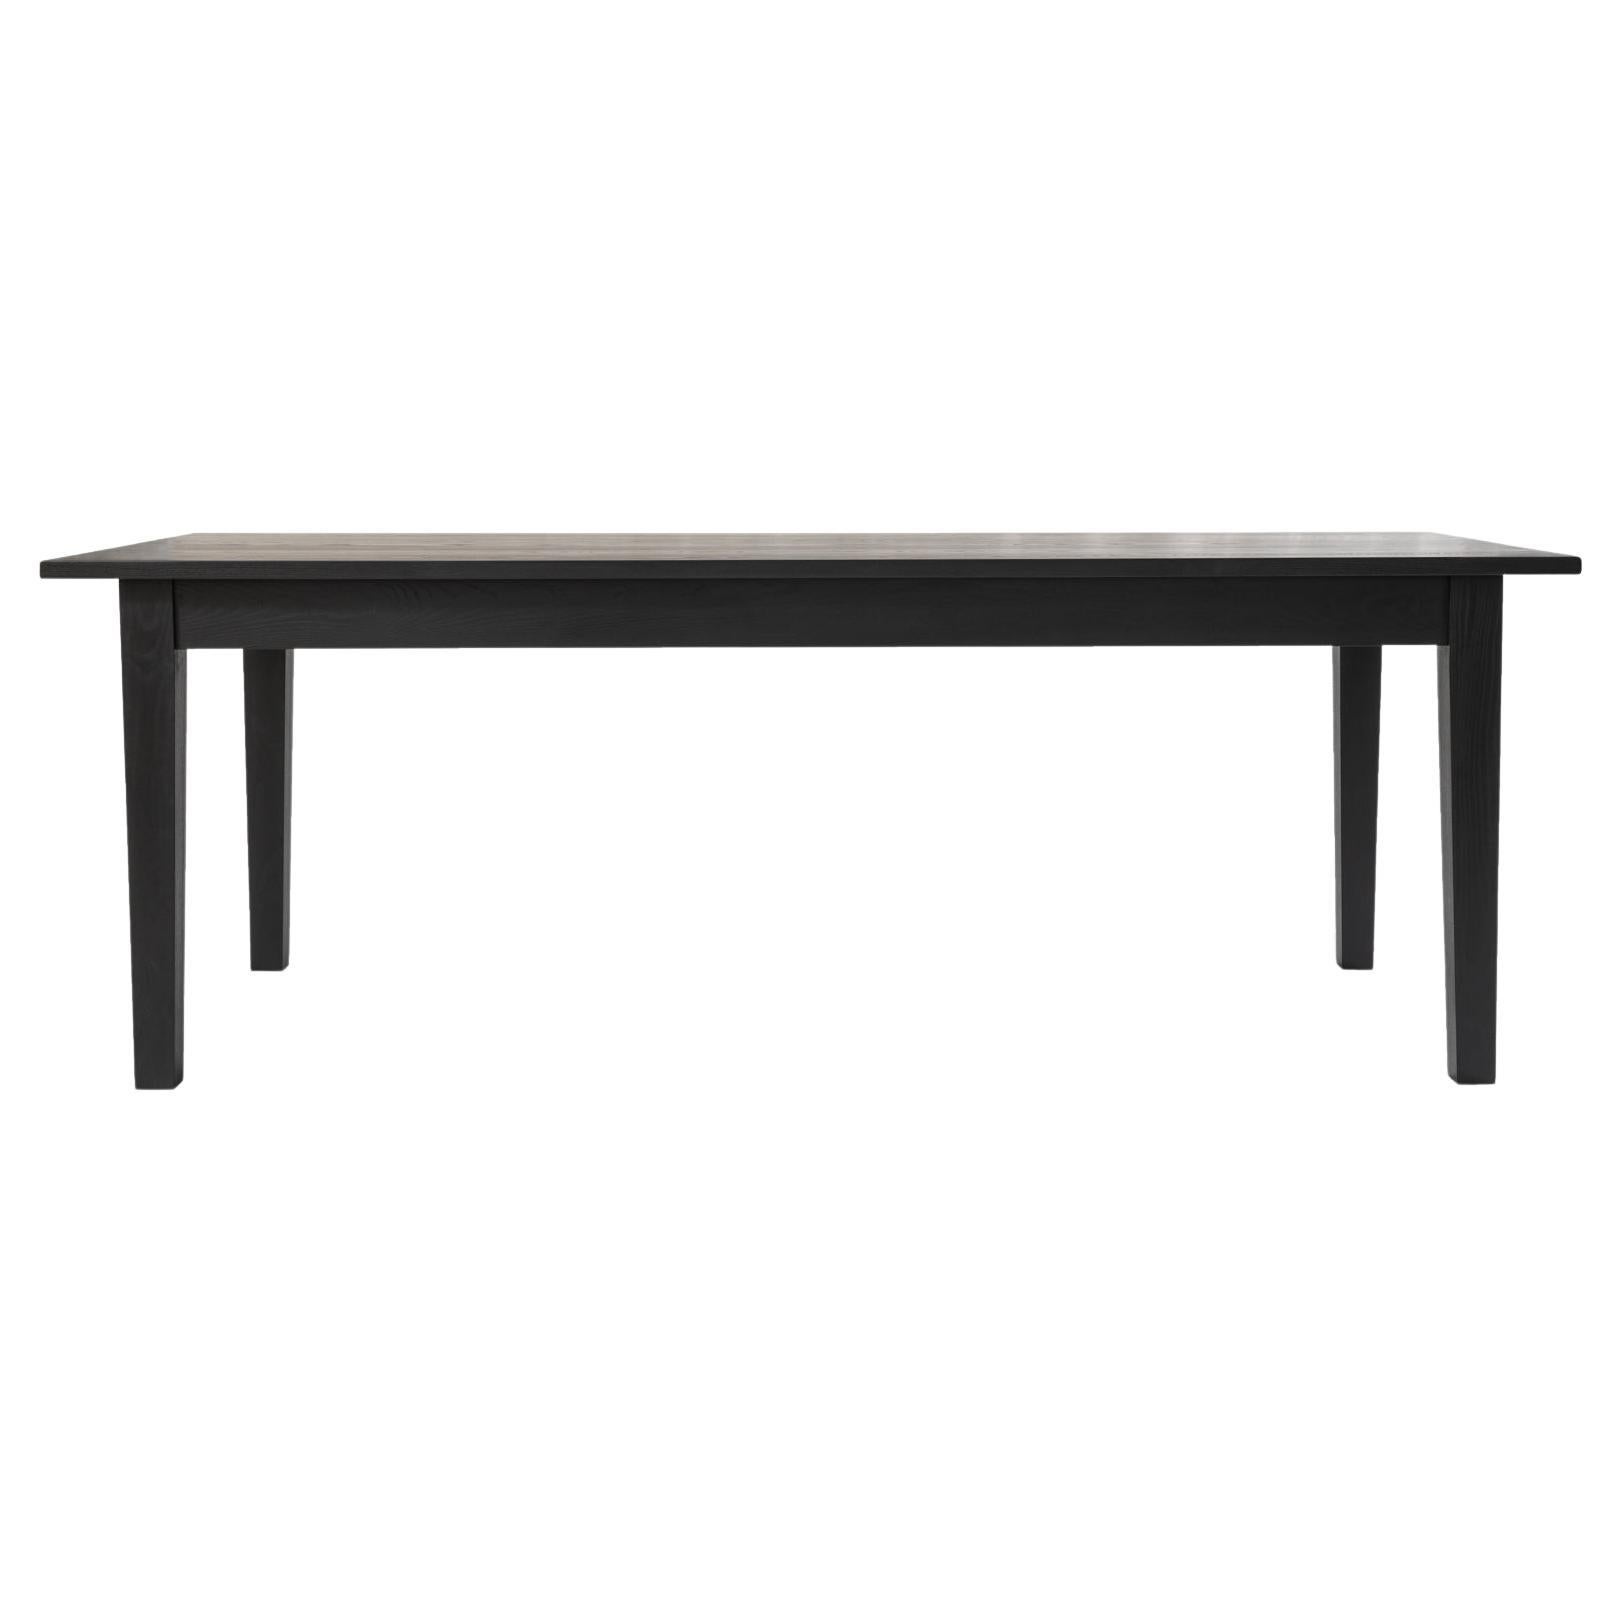 New England Farm Table, Shaker Modern Dining Table in Blackened Ash For Sale